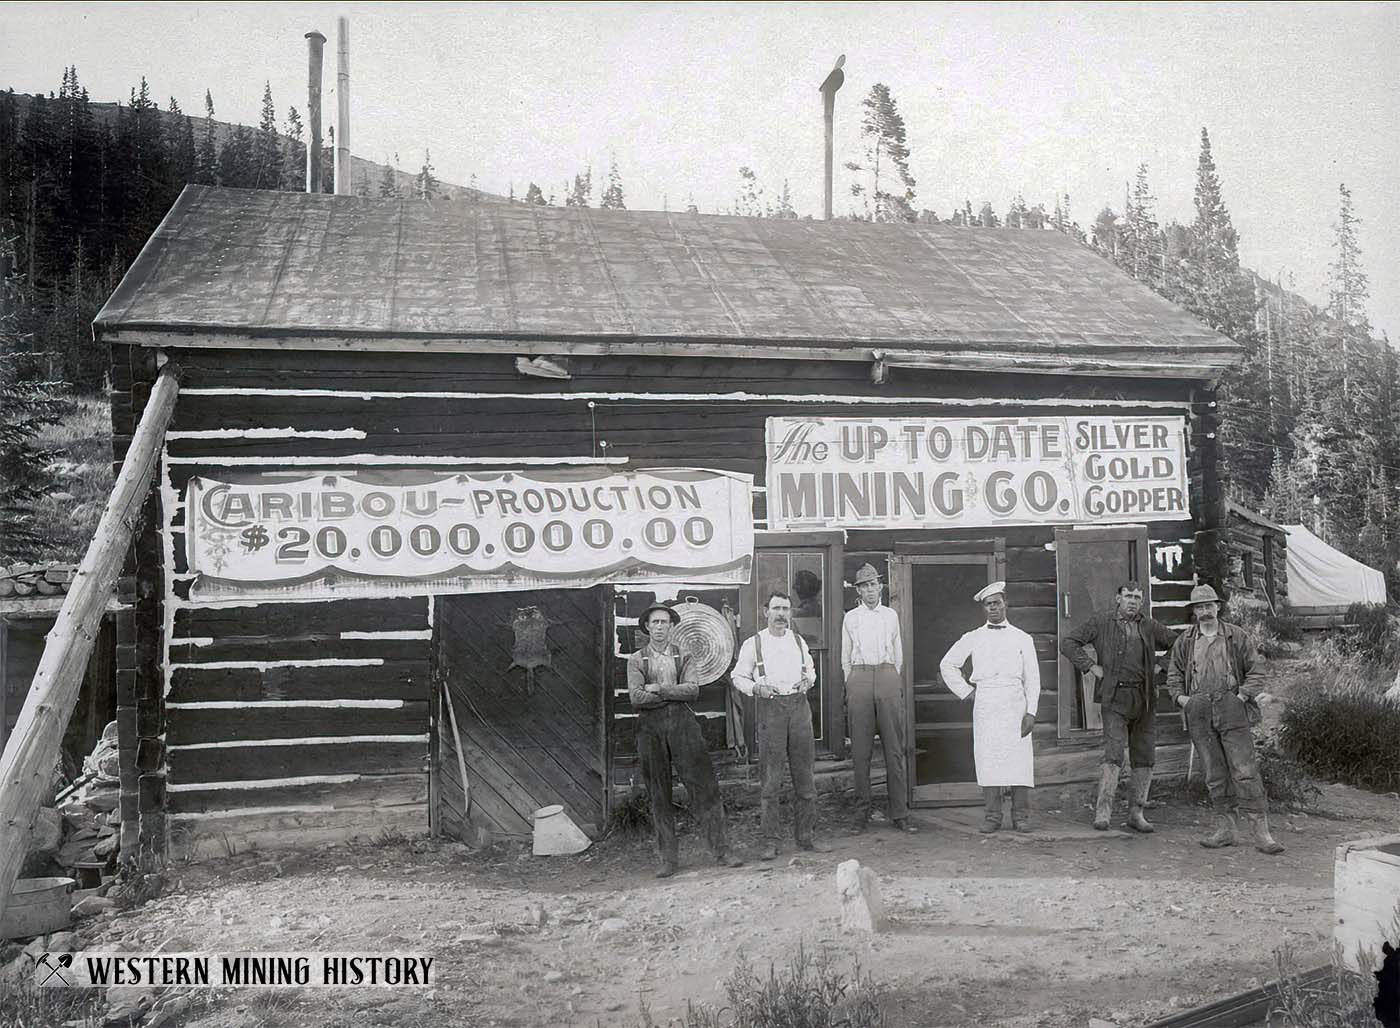 Up To Date Mining Co. at Caribou, Colorado ca. 1912